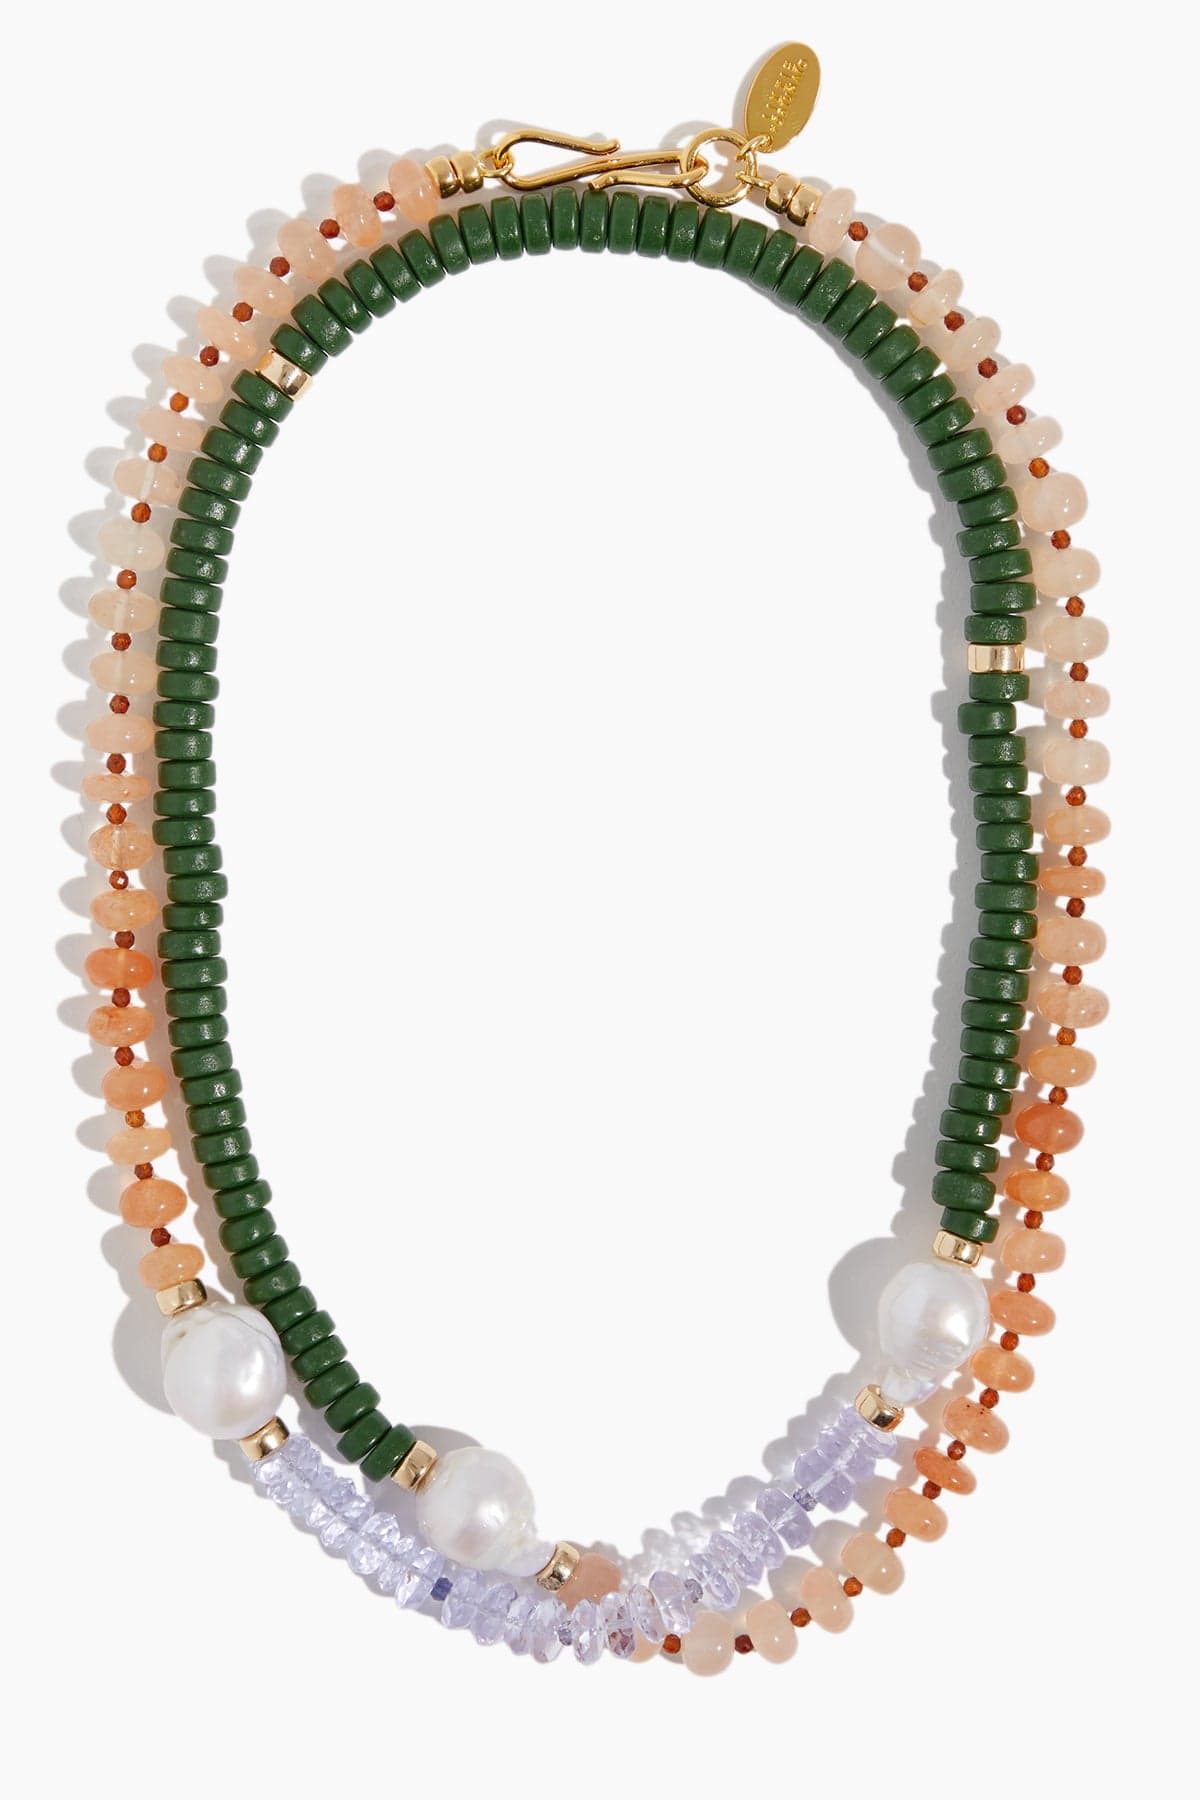 Lizzie Fortunato Necklaces Cabana Necklace in Multi Lizzie Fortunato Cabana Necklace in Multi